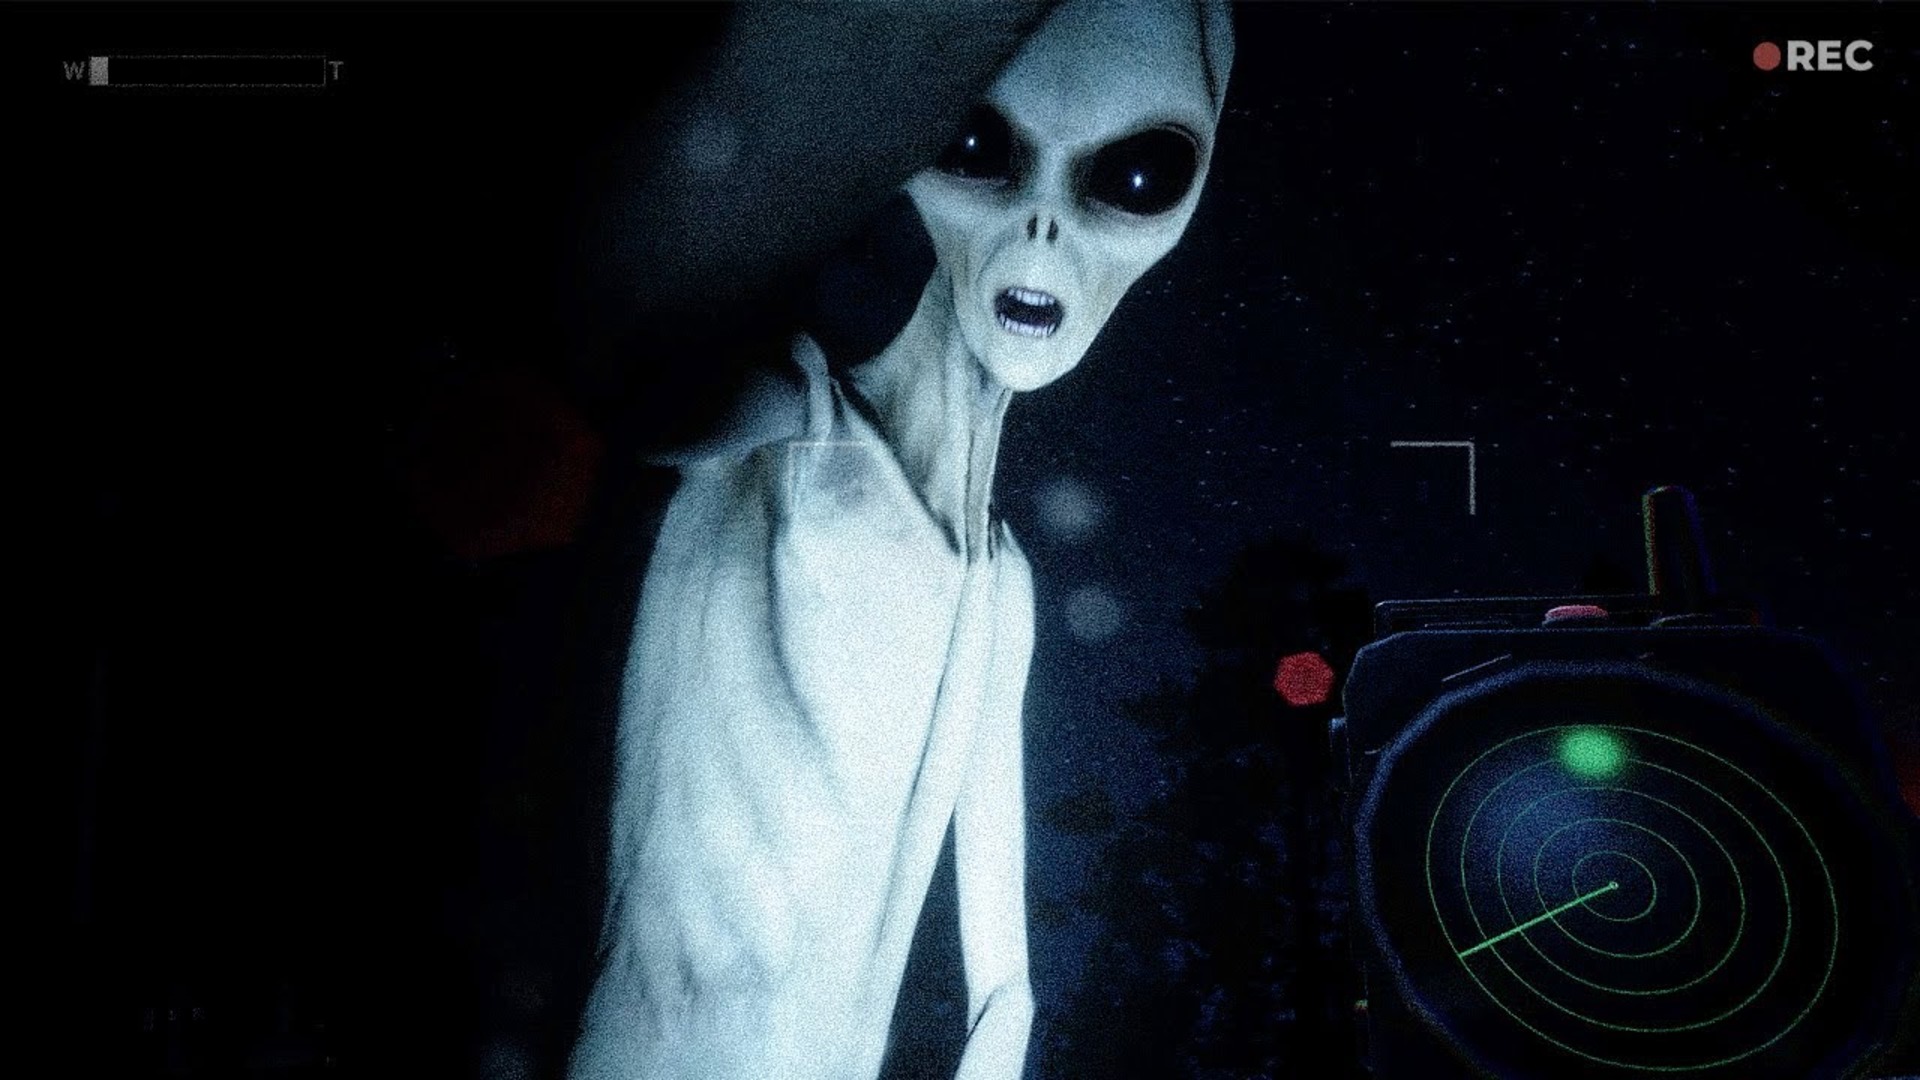 This highly promising indie horror might just be the alien abduction